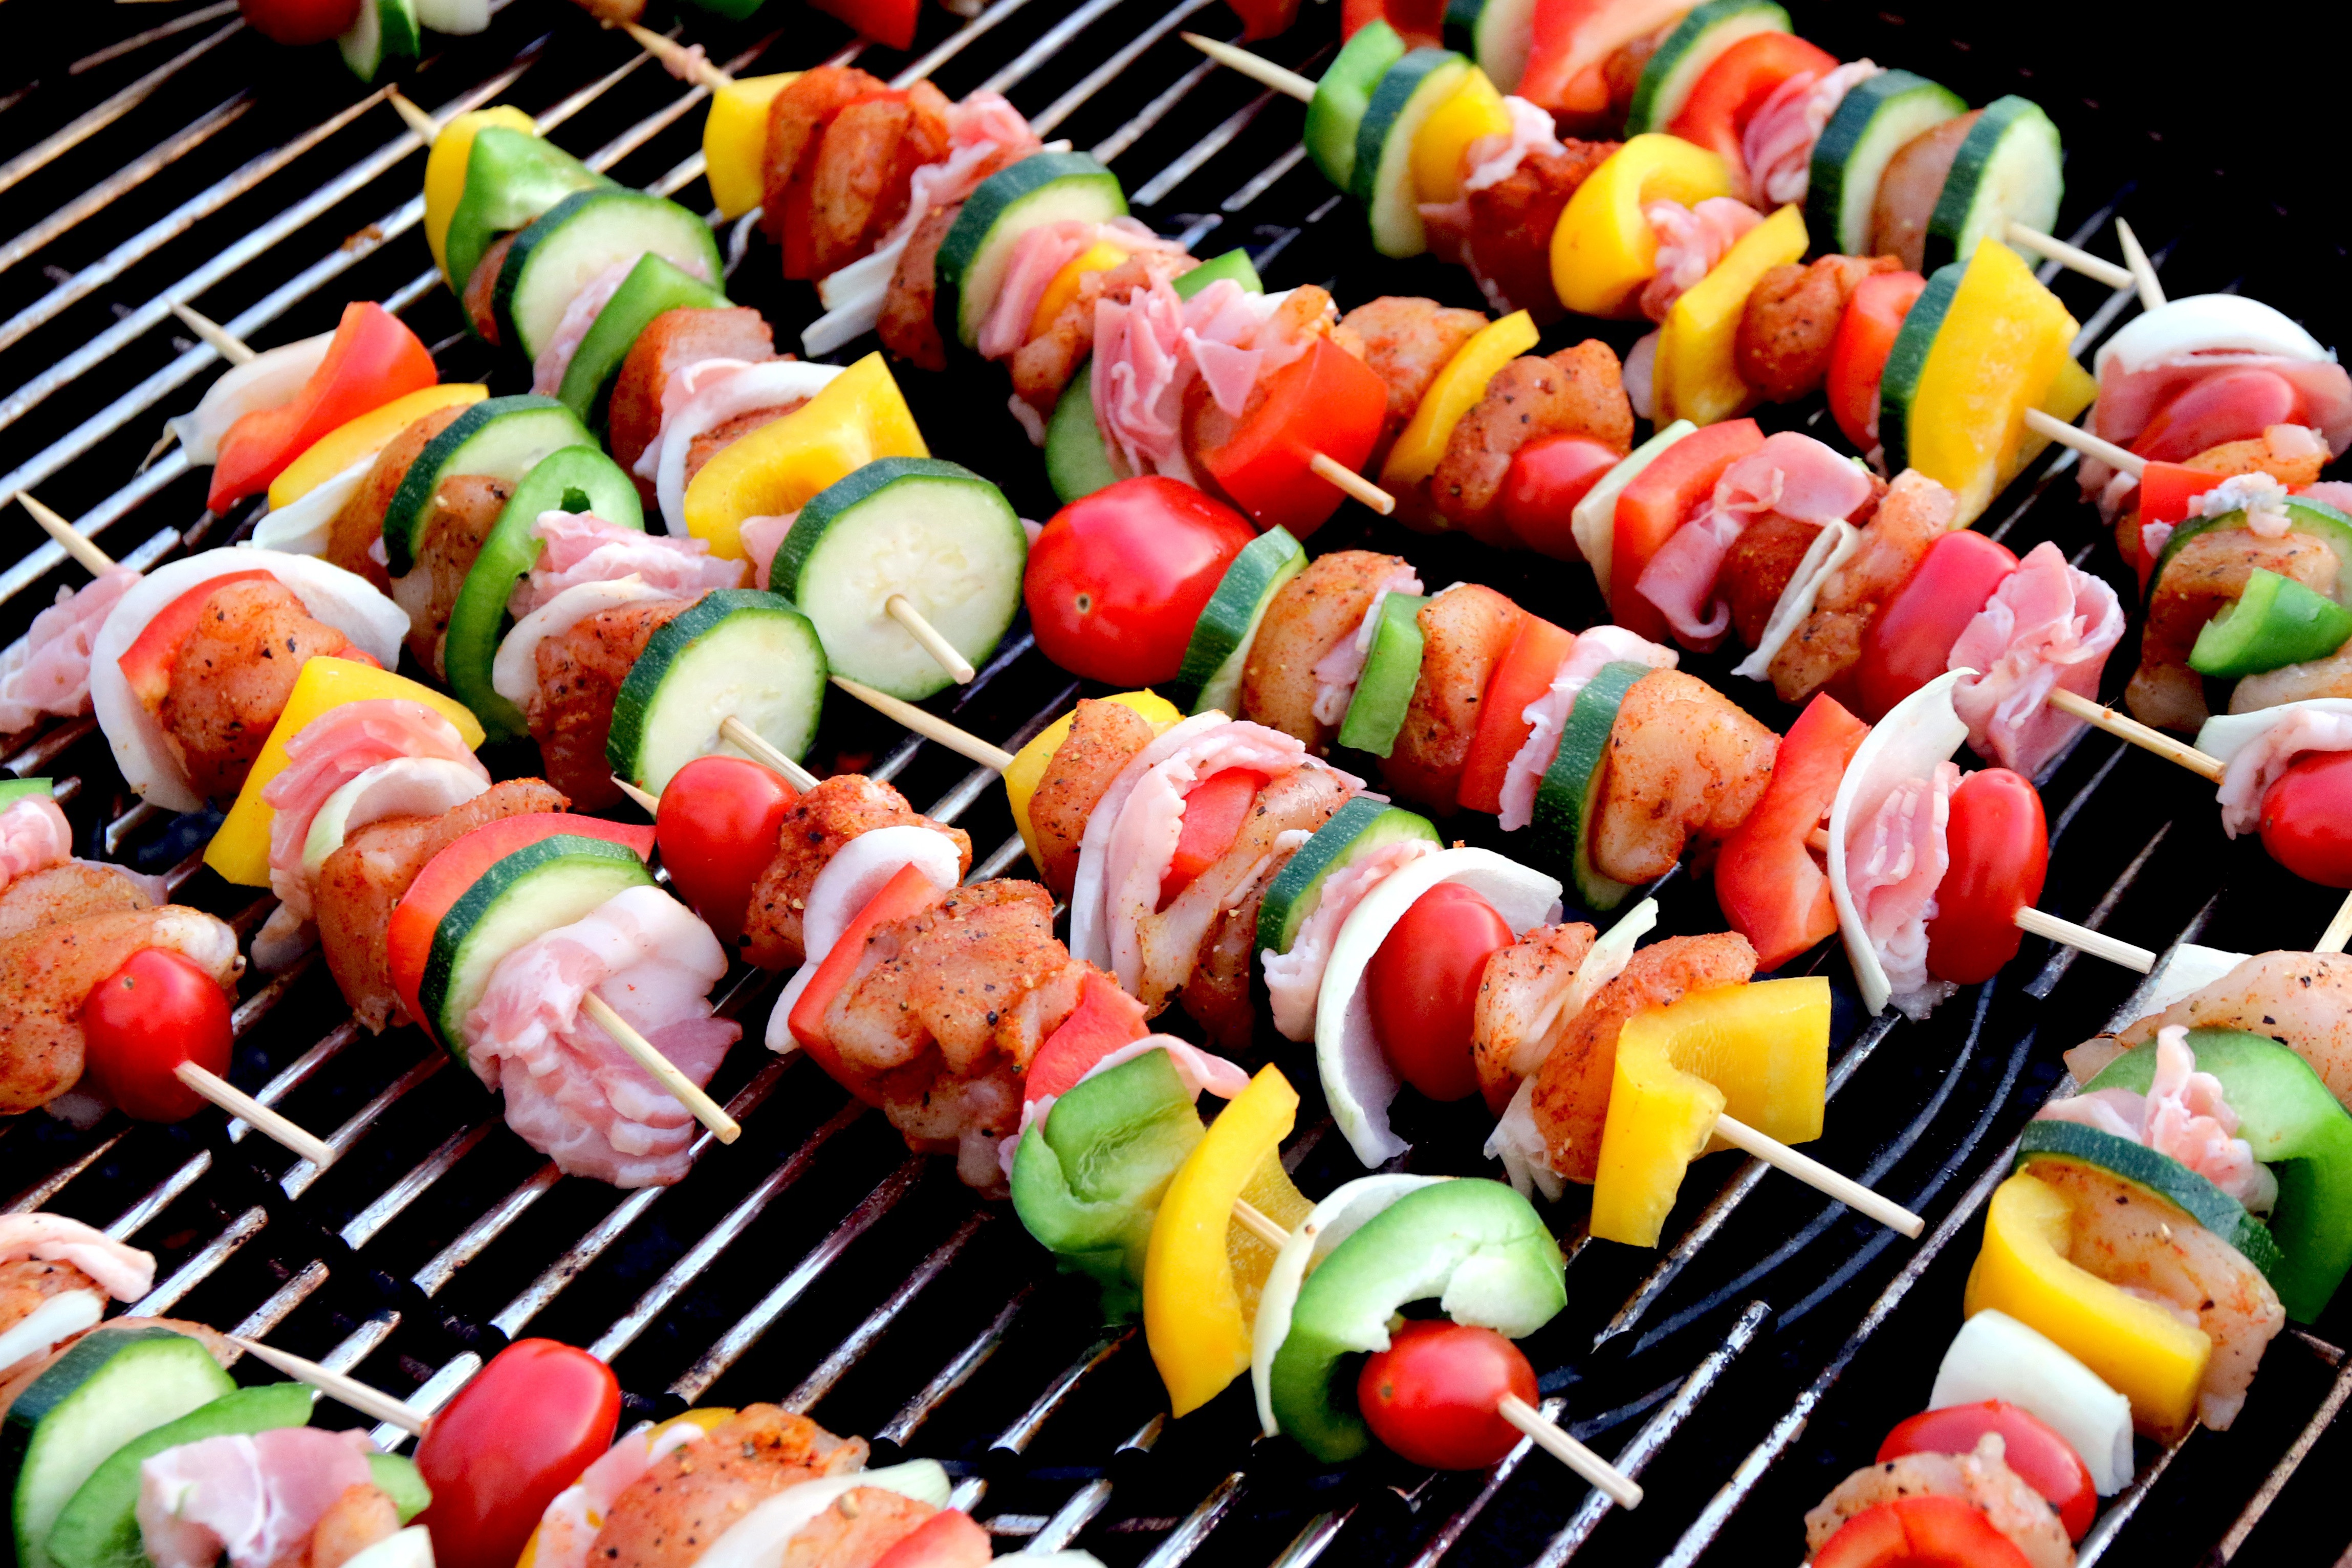 Shish Kebabs Free Stock Image and Picture.